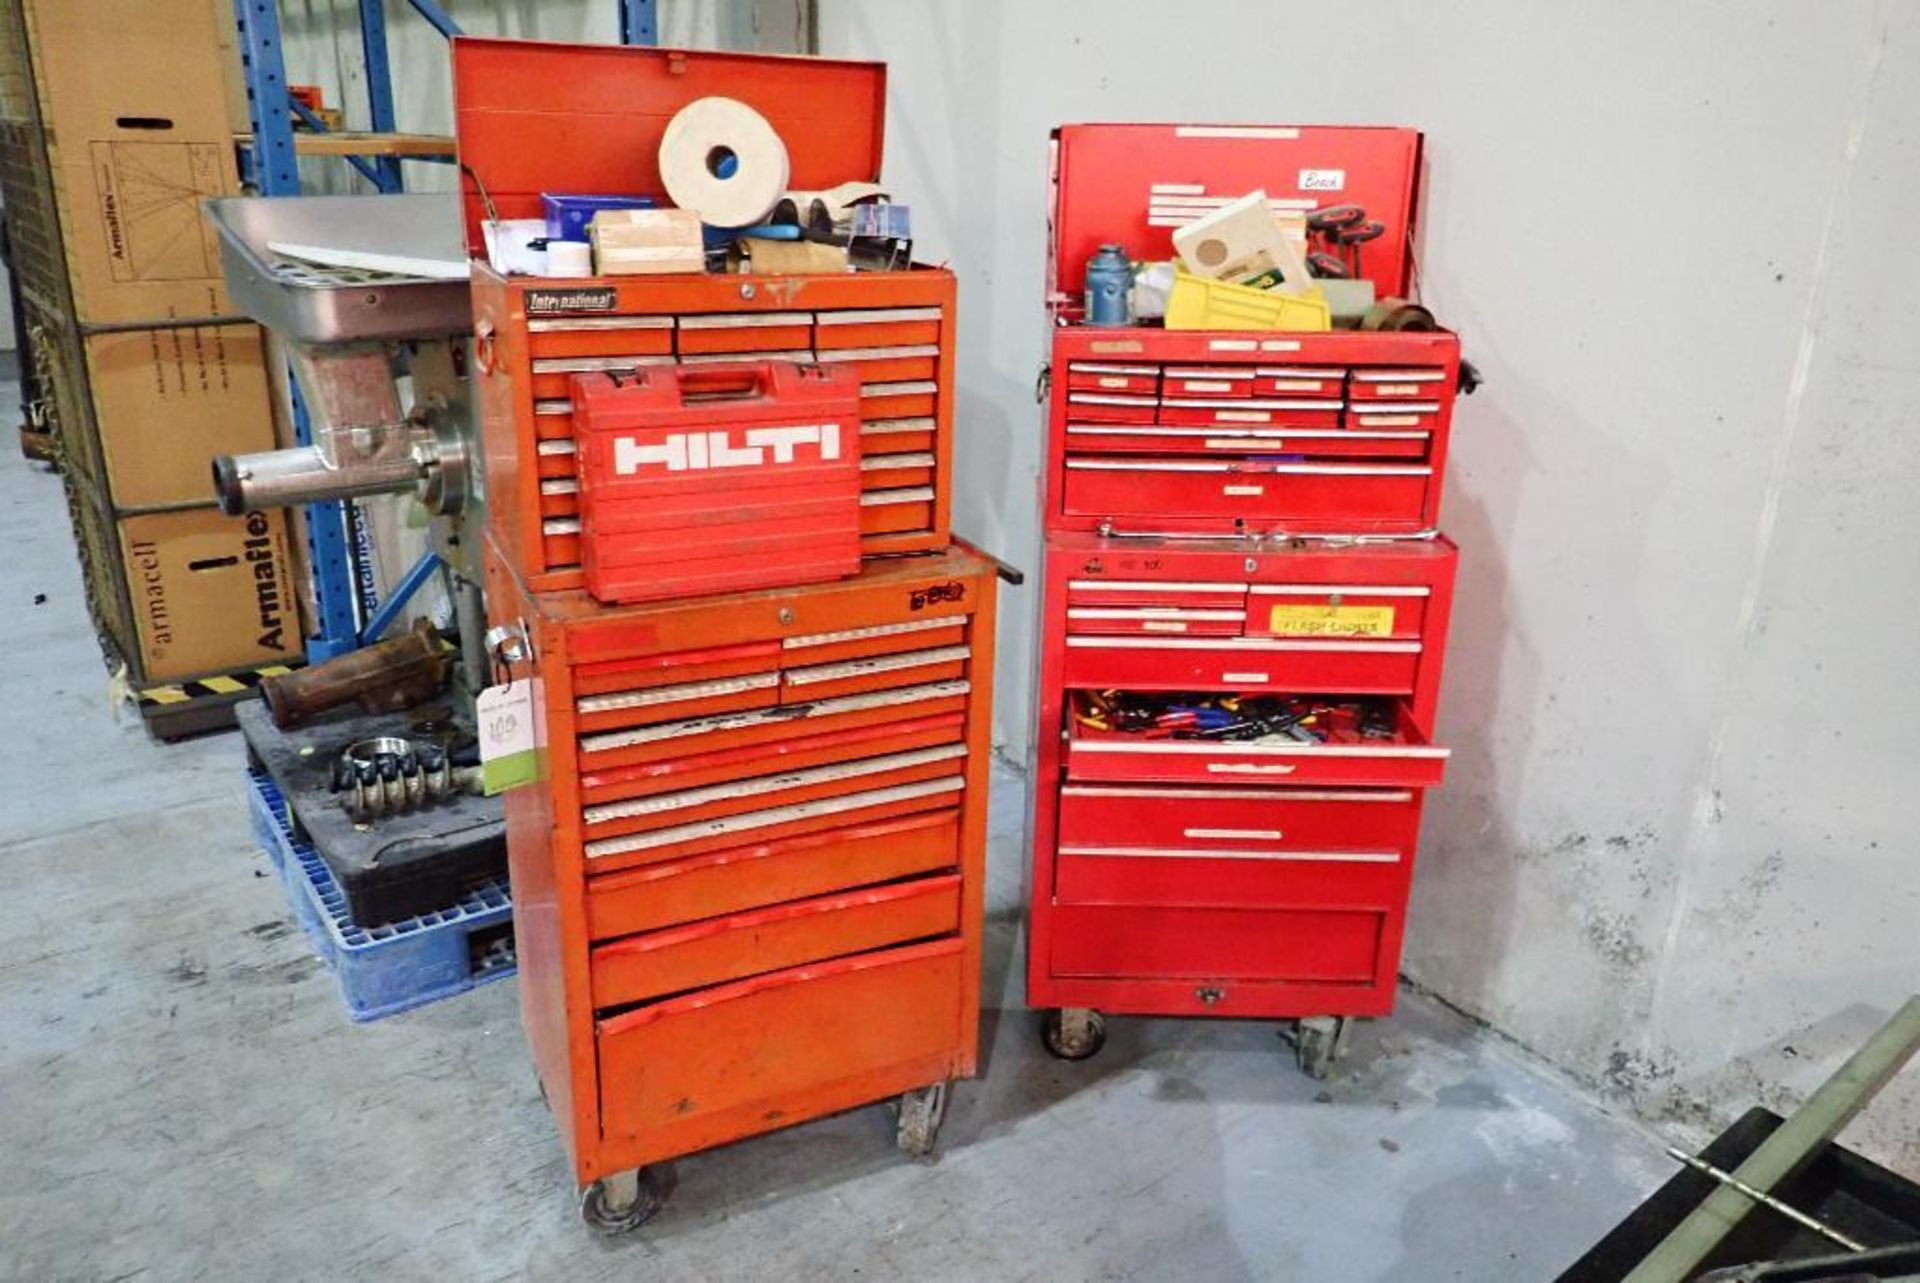 (2) tool chests with contents, wrenches, sockets, drill bits screw drivers, air tools, hammers, plie